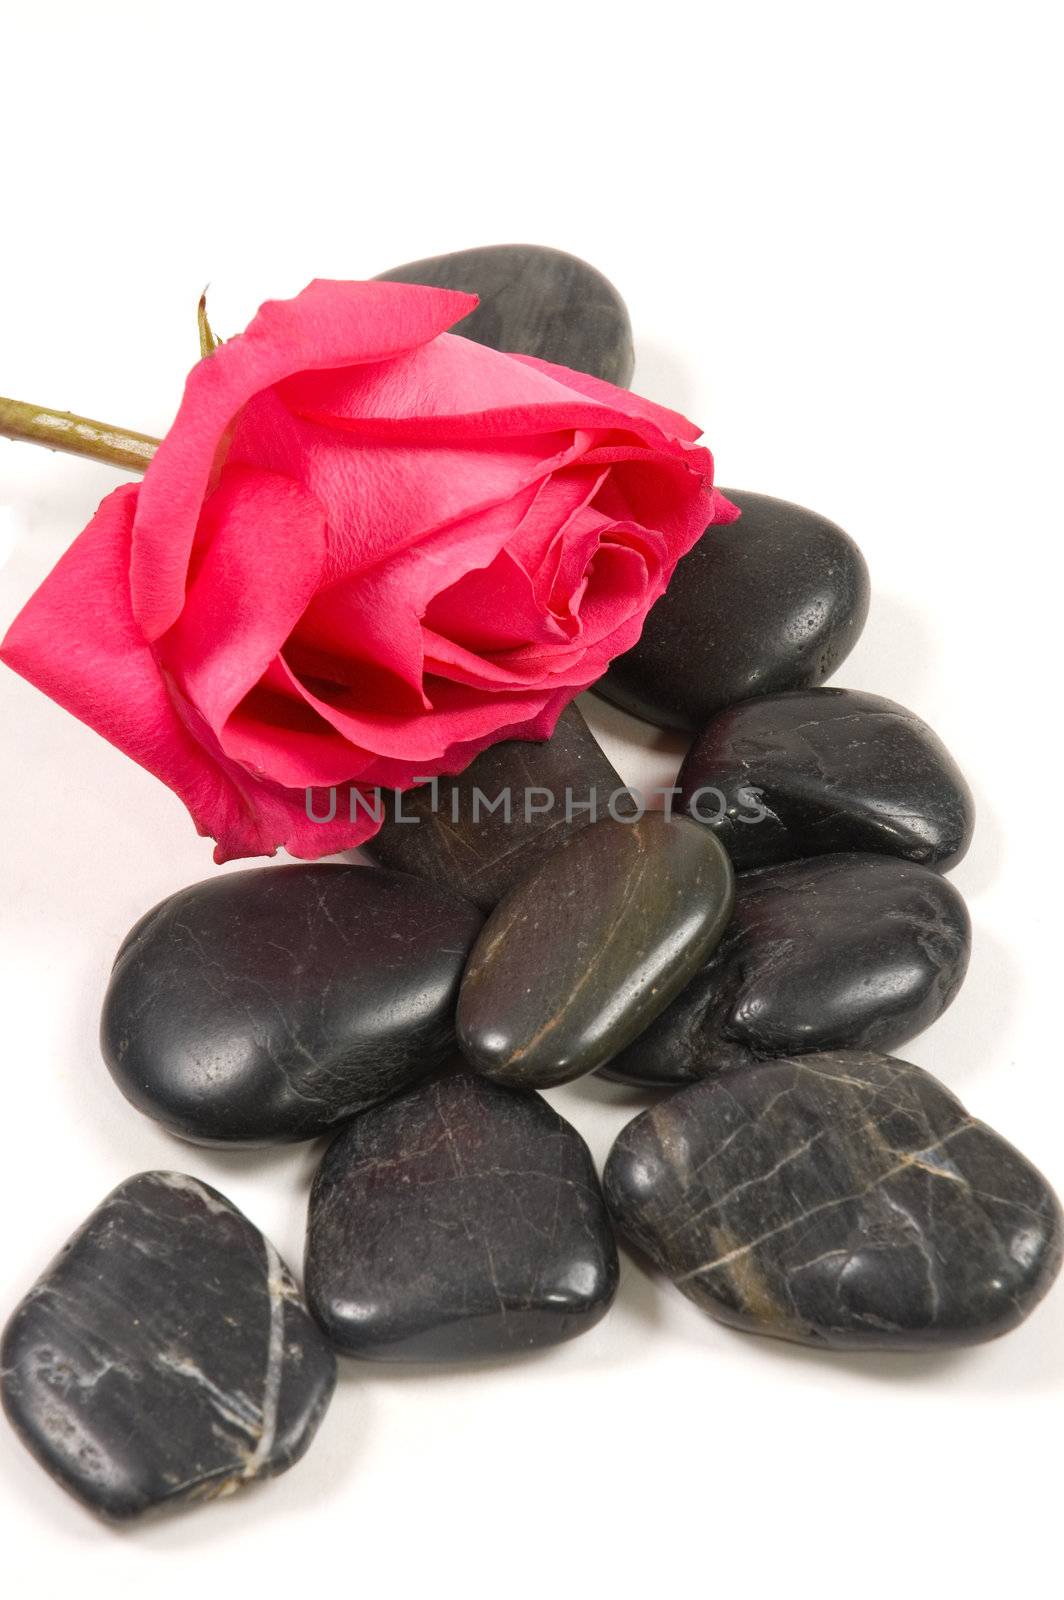 pink rose with spa stones isolated on white